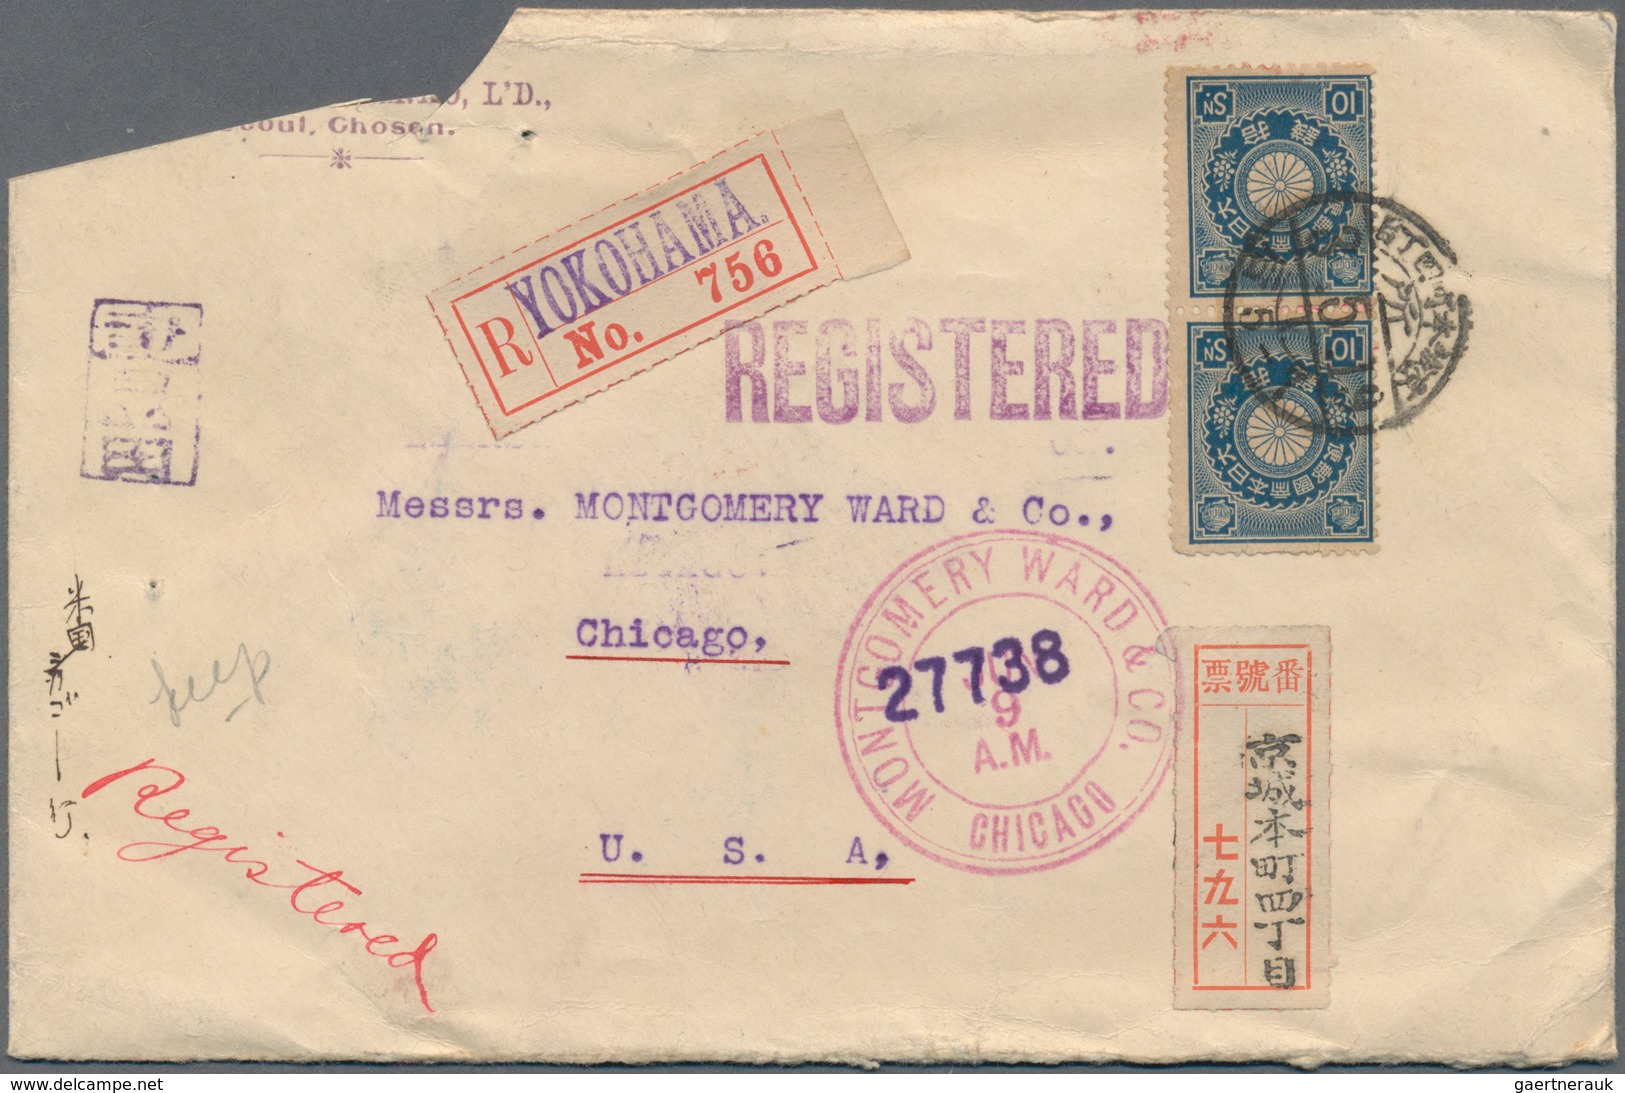 Japanische Post In Korea: 1910/19, Seoul Branches, Three Covers To Foreign: Registered At 20 S. Rate - Militärpostmarken